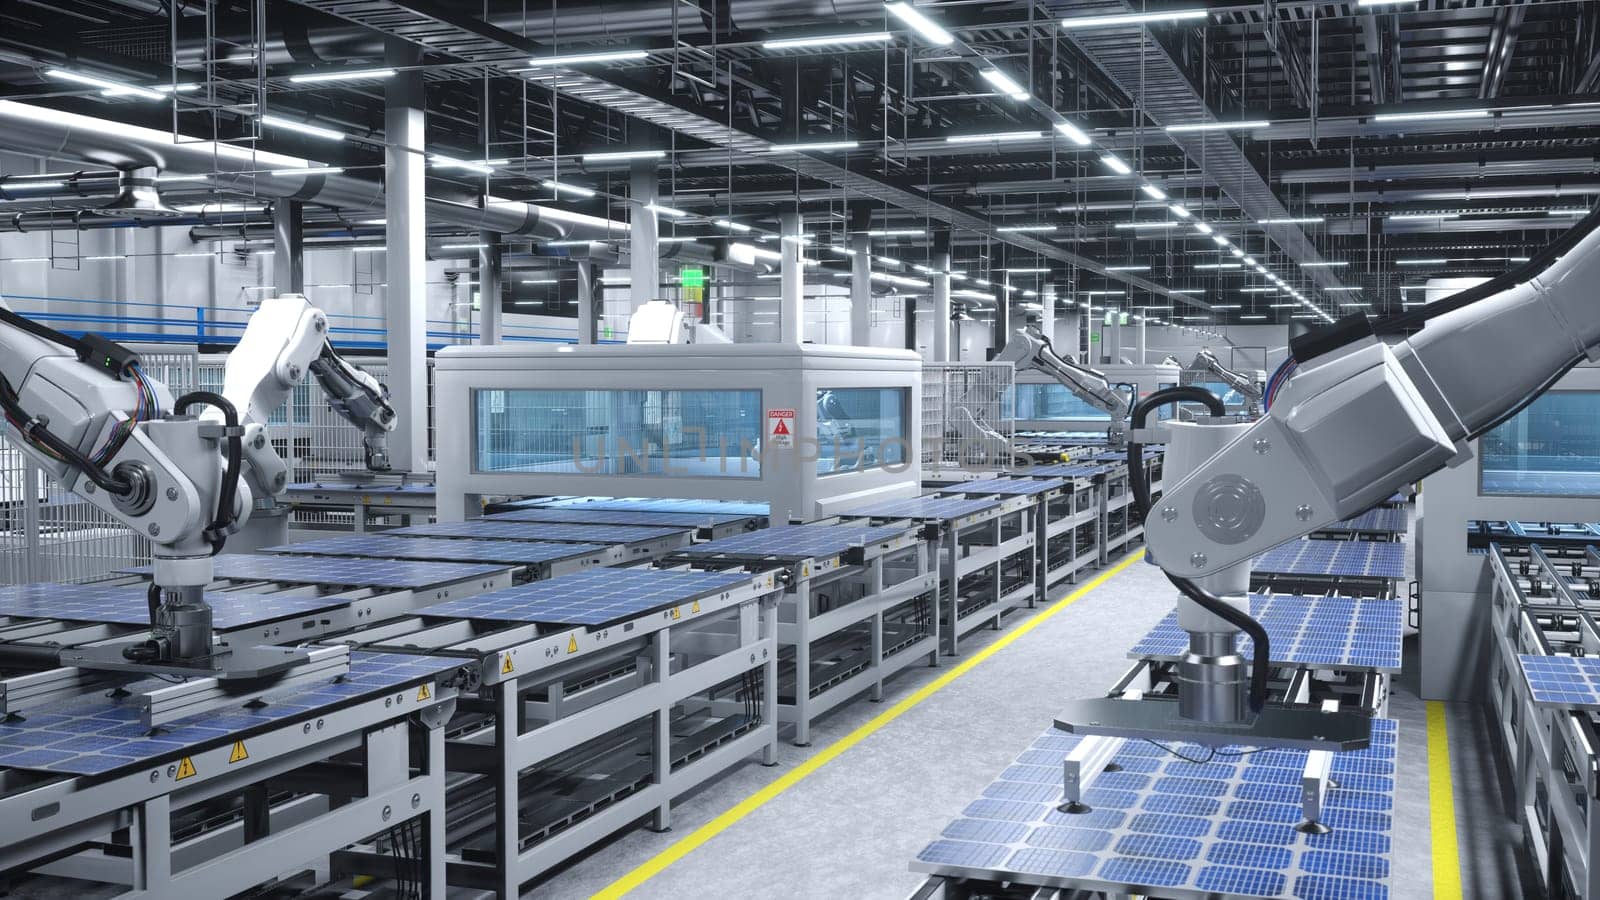 Company manufacturing solar cells in green energy facility, 3D illustration by DCStudio